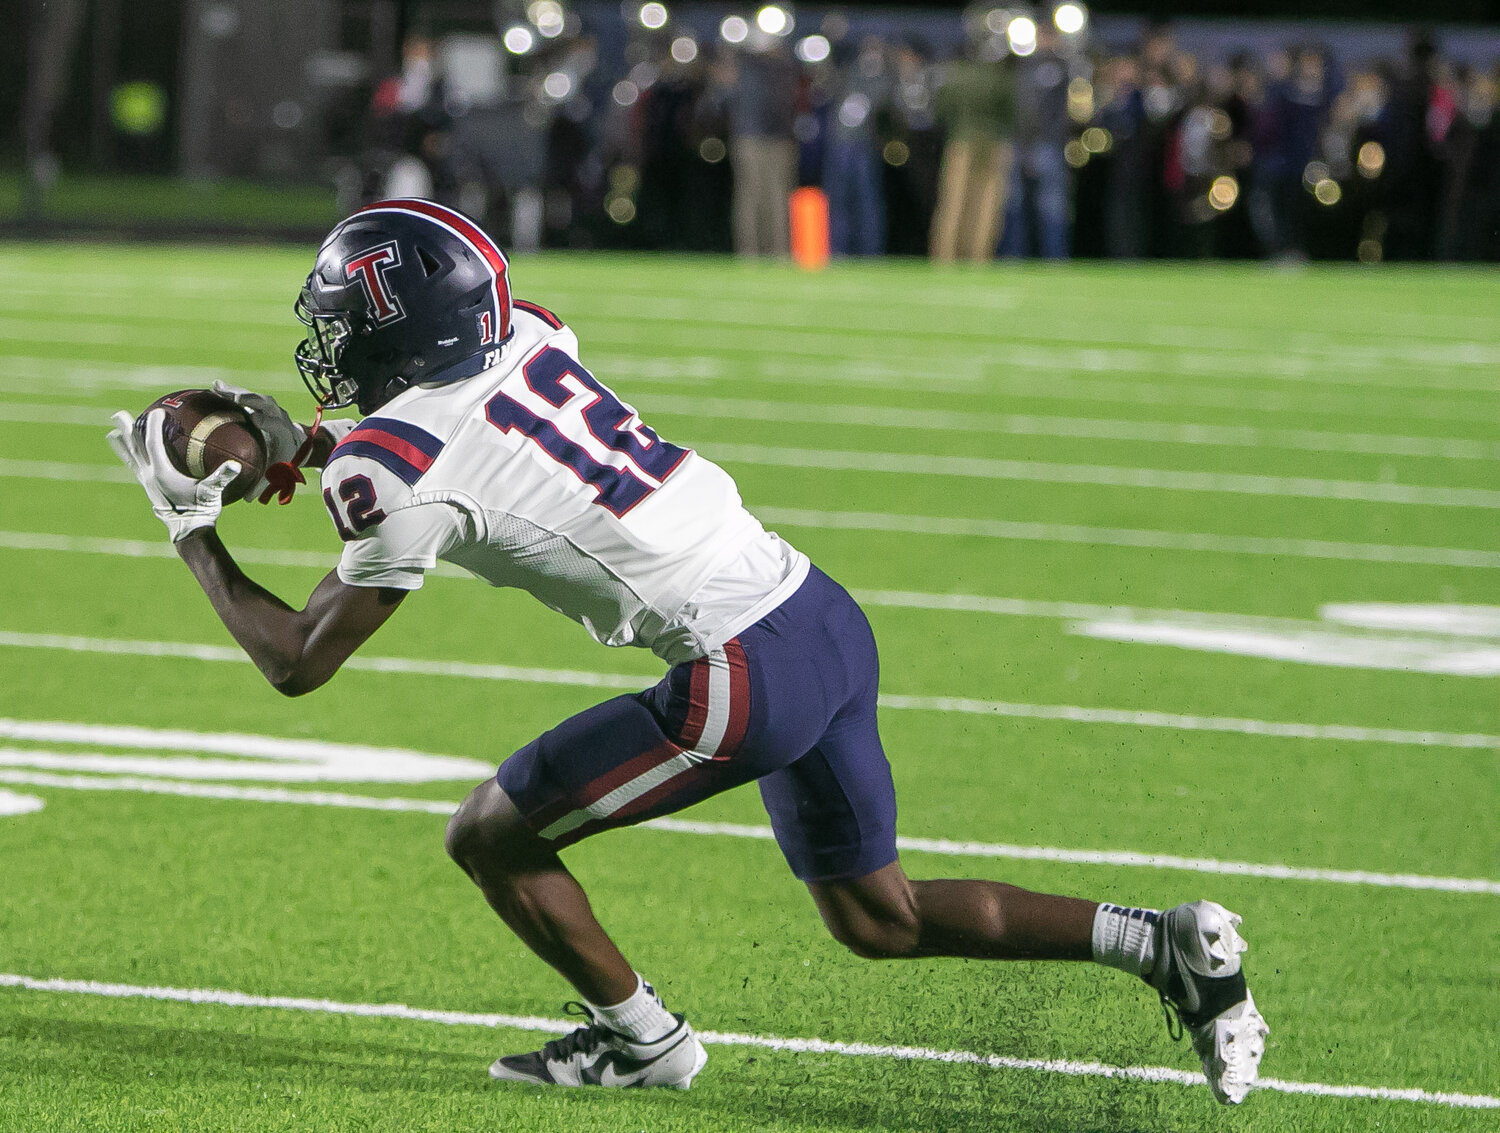 KJ Madison makes a catch during Friday's game between Tompkins and Ridge Point at Hall Stadium.